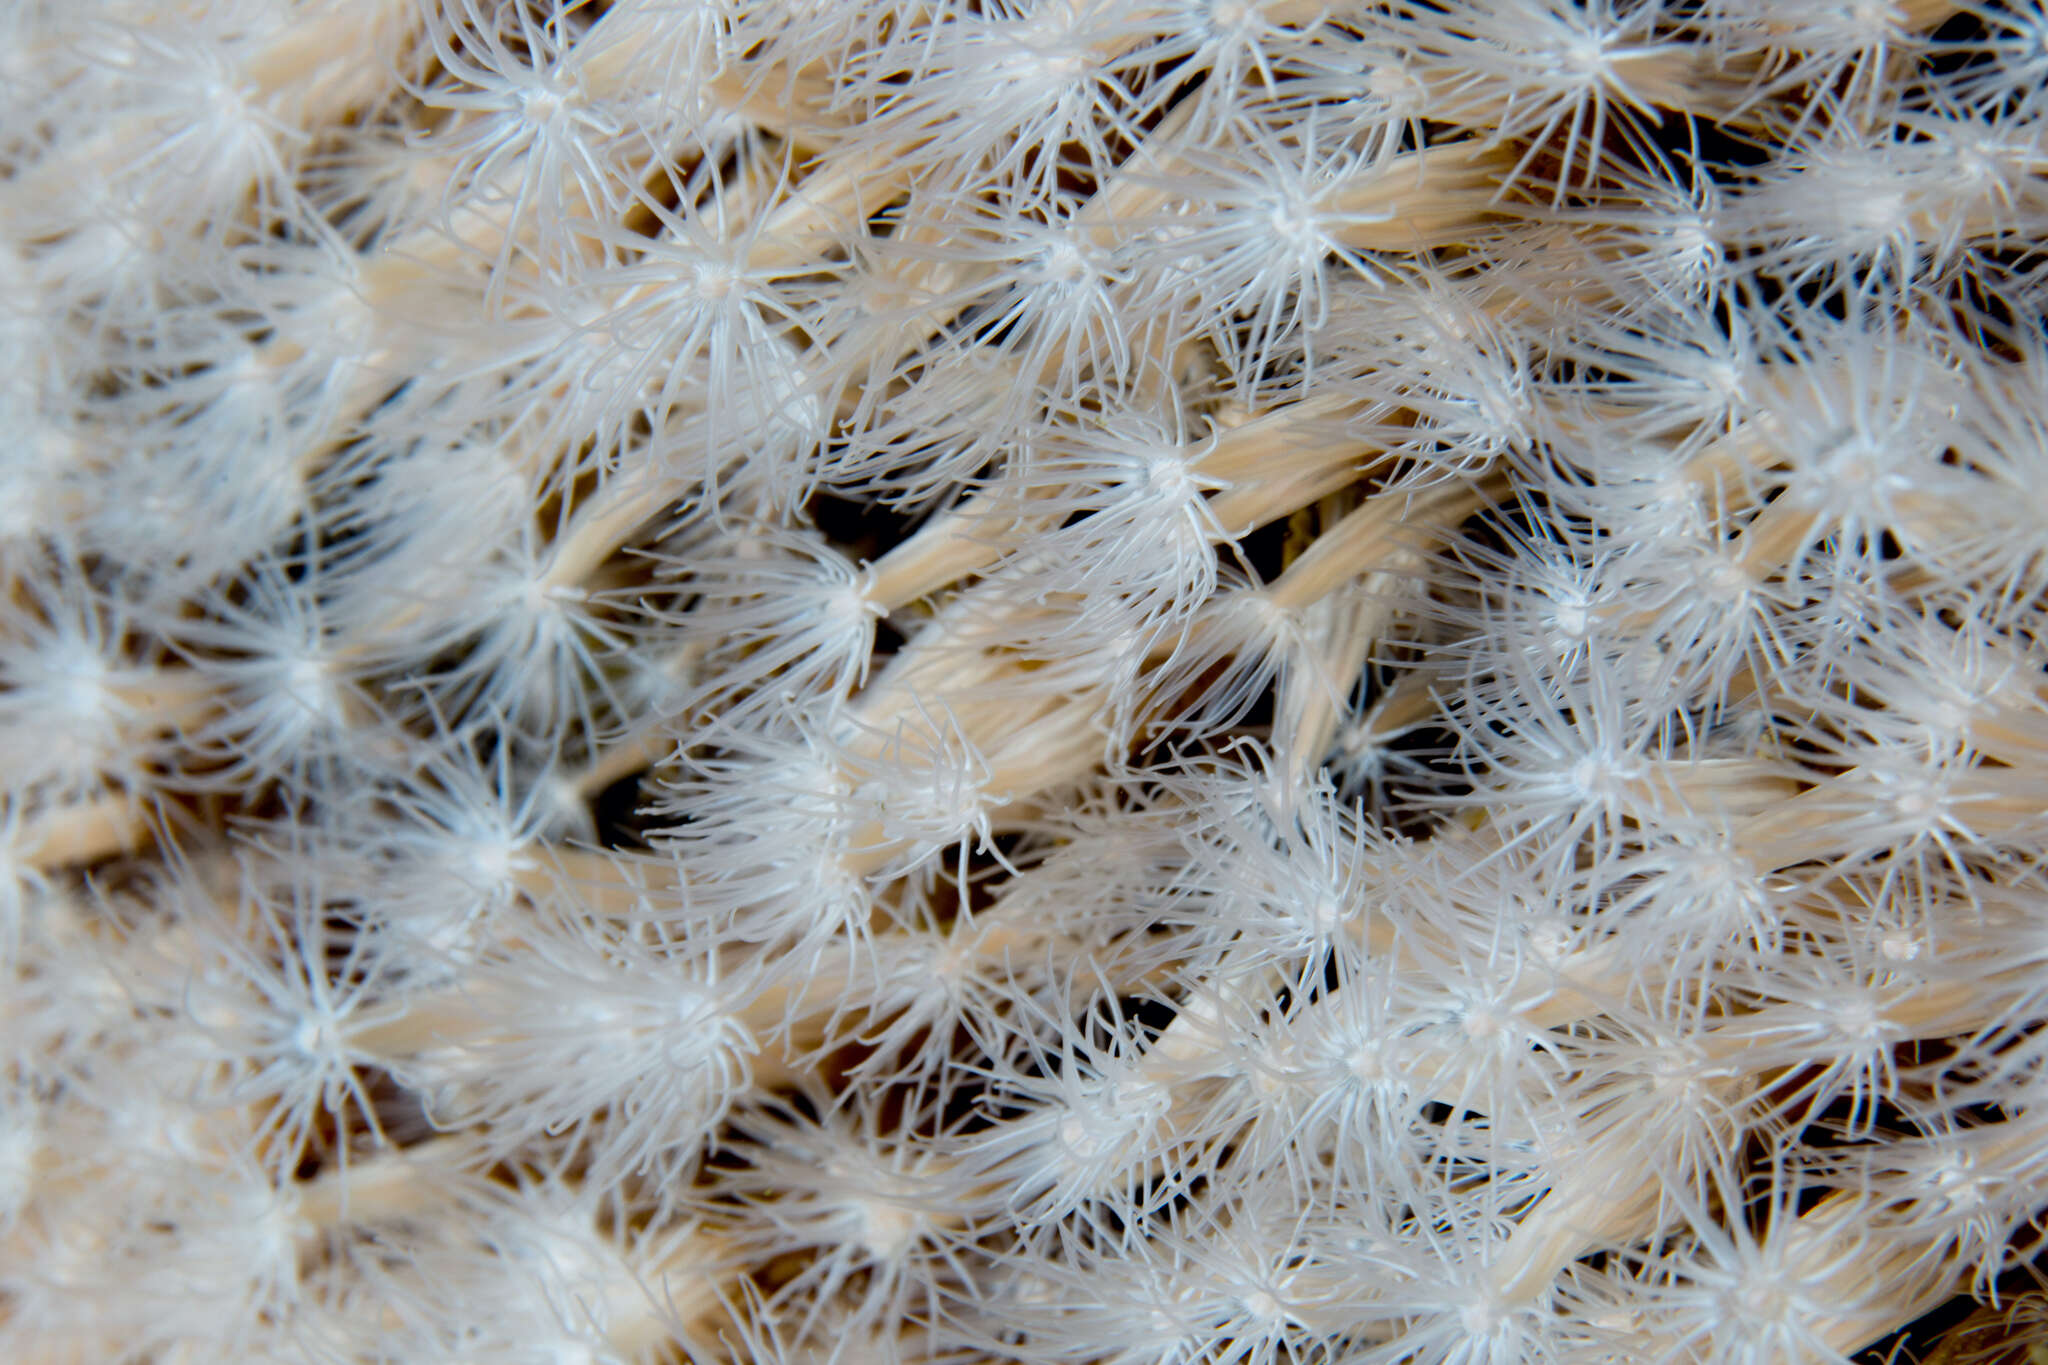 Image of lined sea anemone